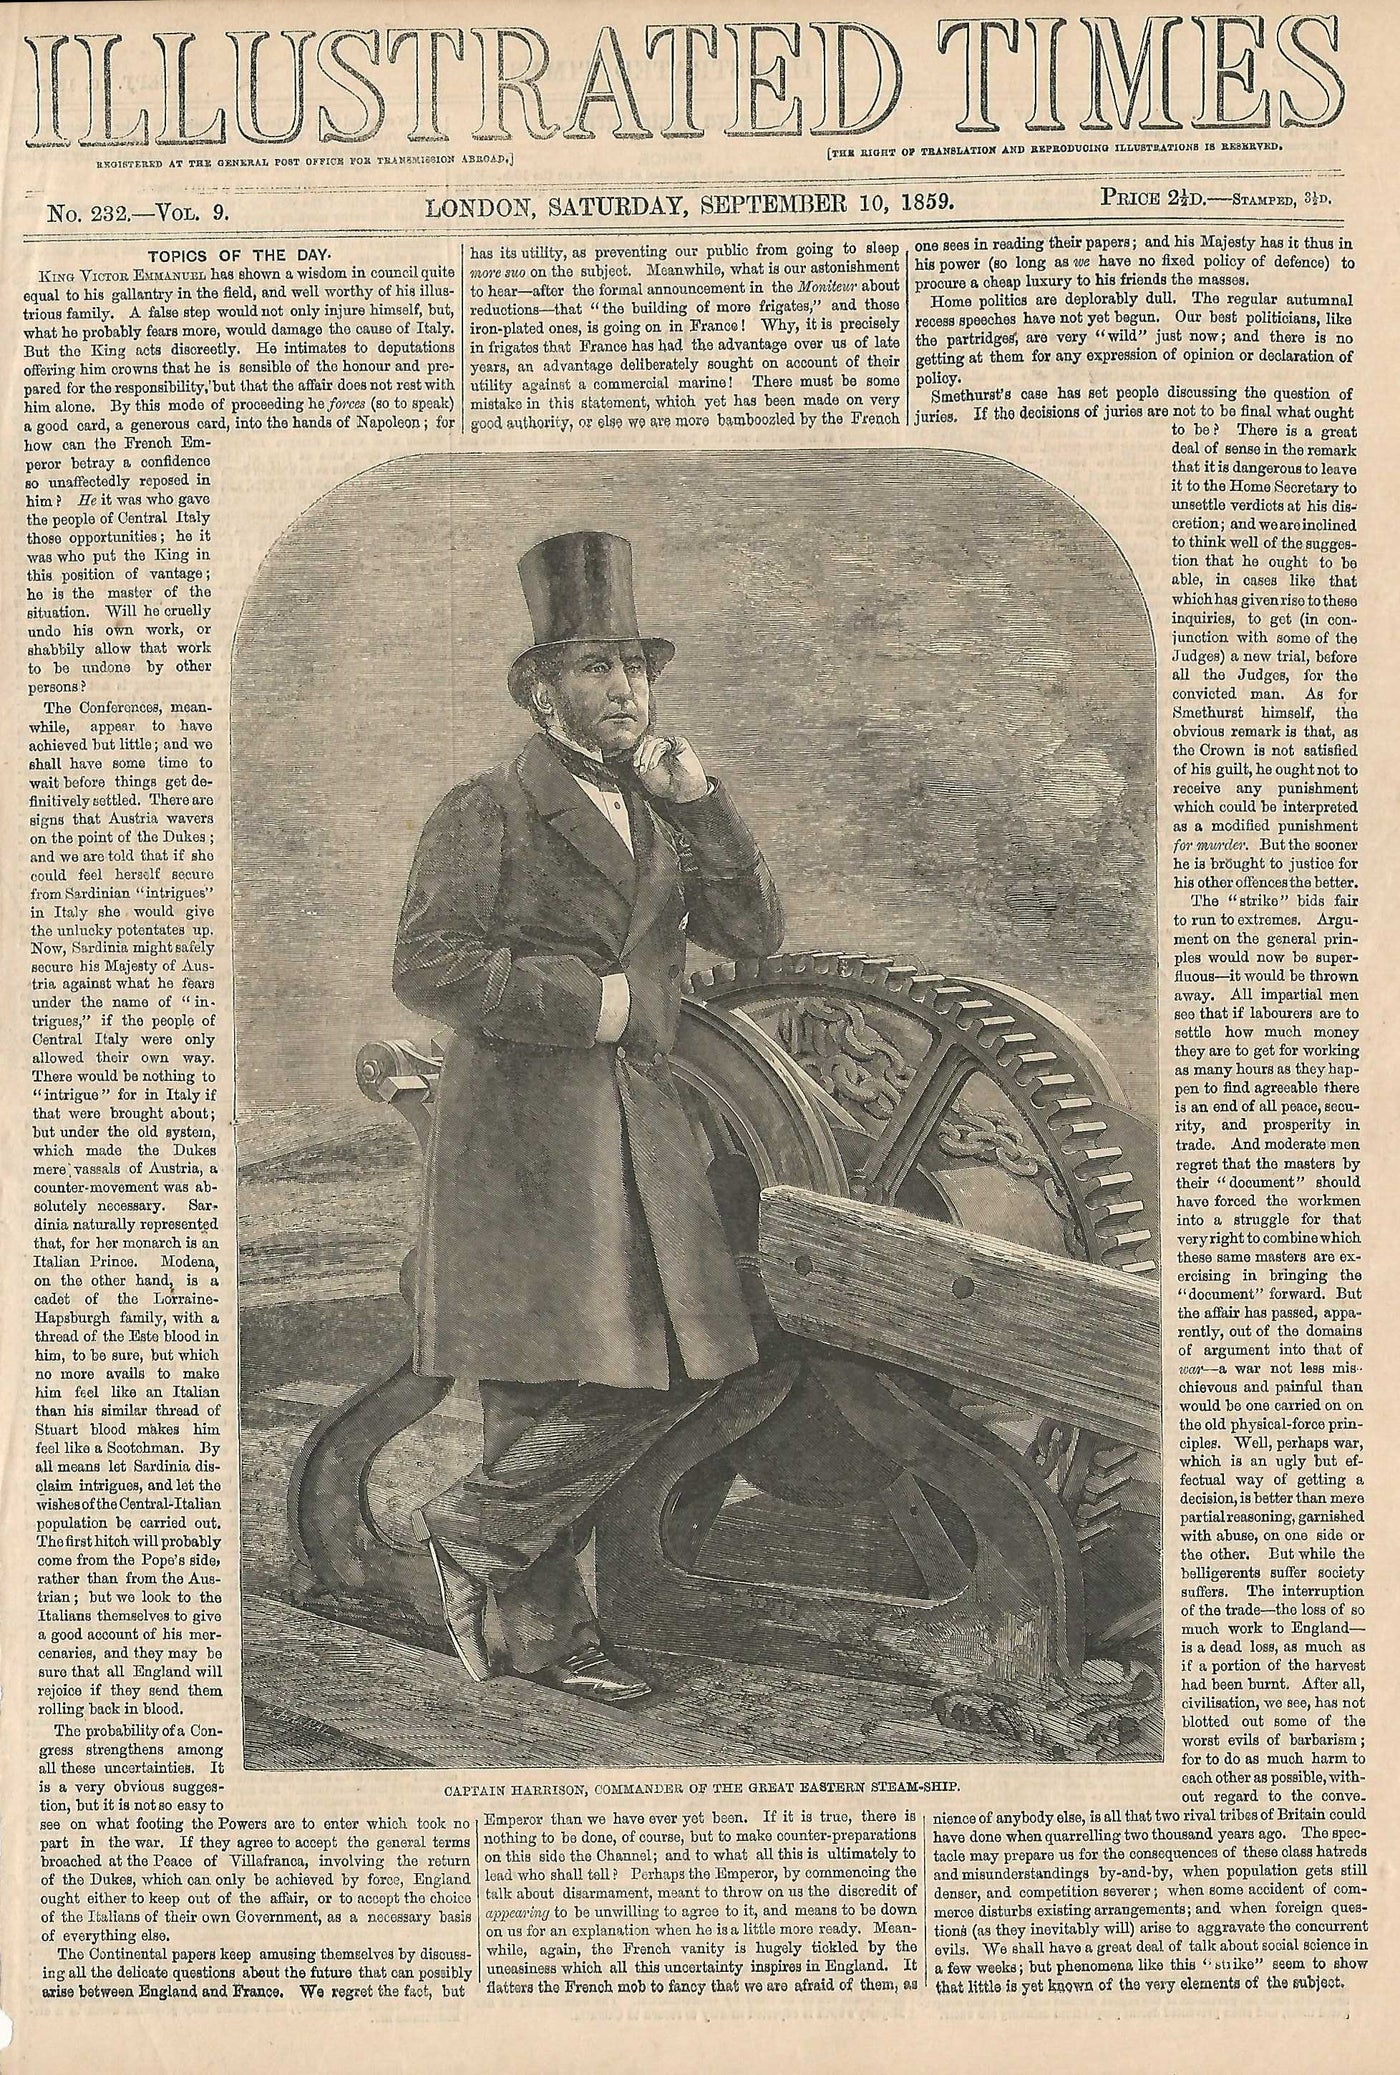 Great Eastern's Captain Harrison antique rint from Illustrated Times